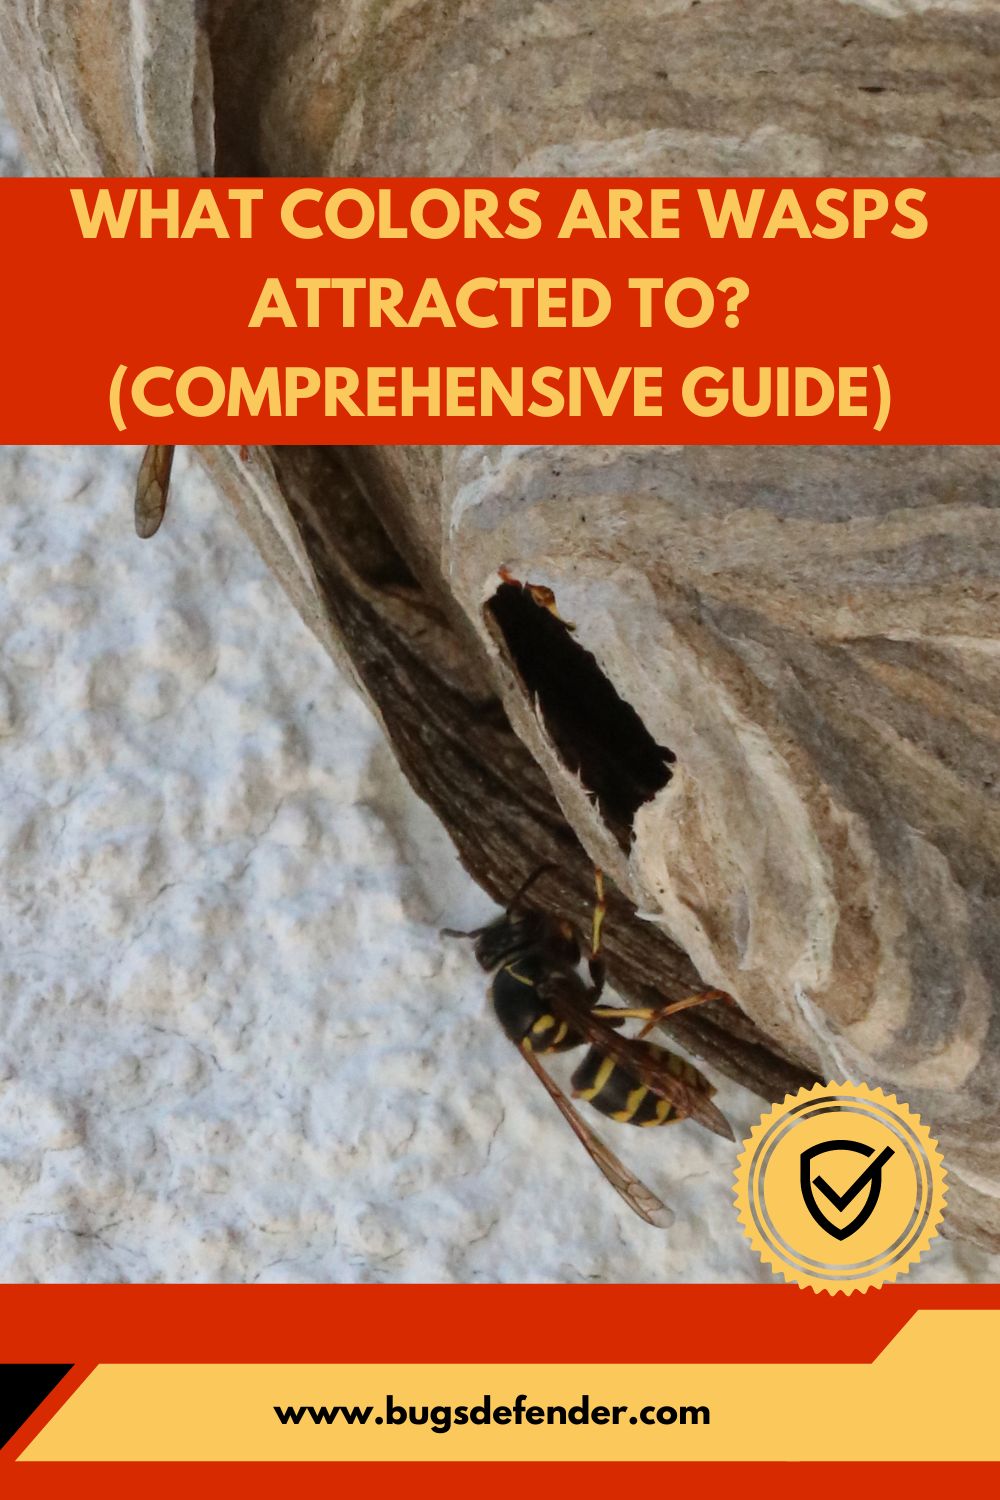 What Colors Are Wasps Attracted To? (Comprehensive Guide) pin1